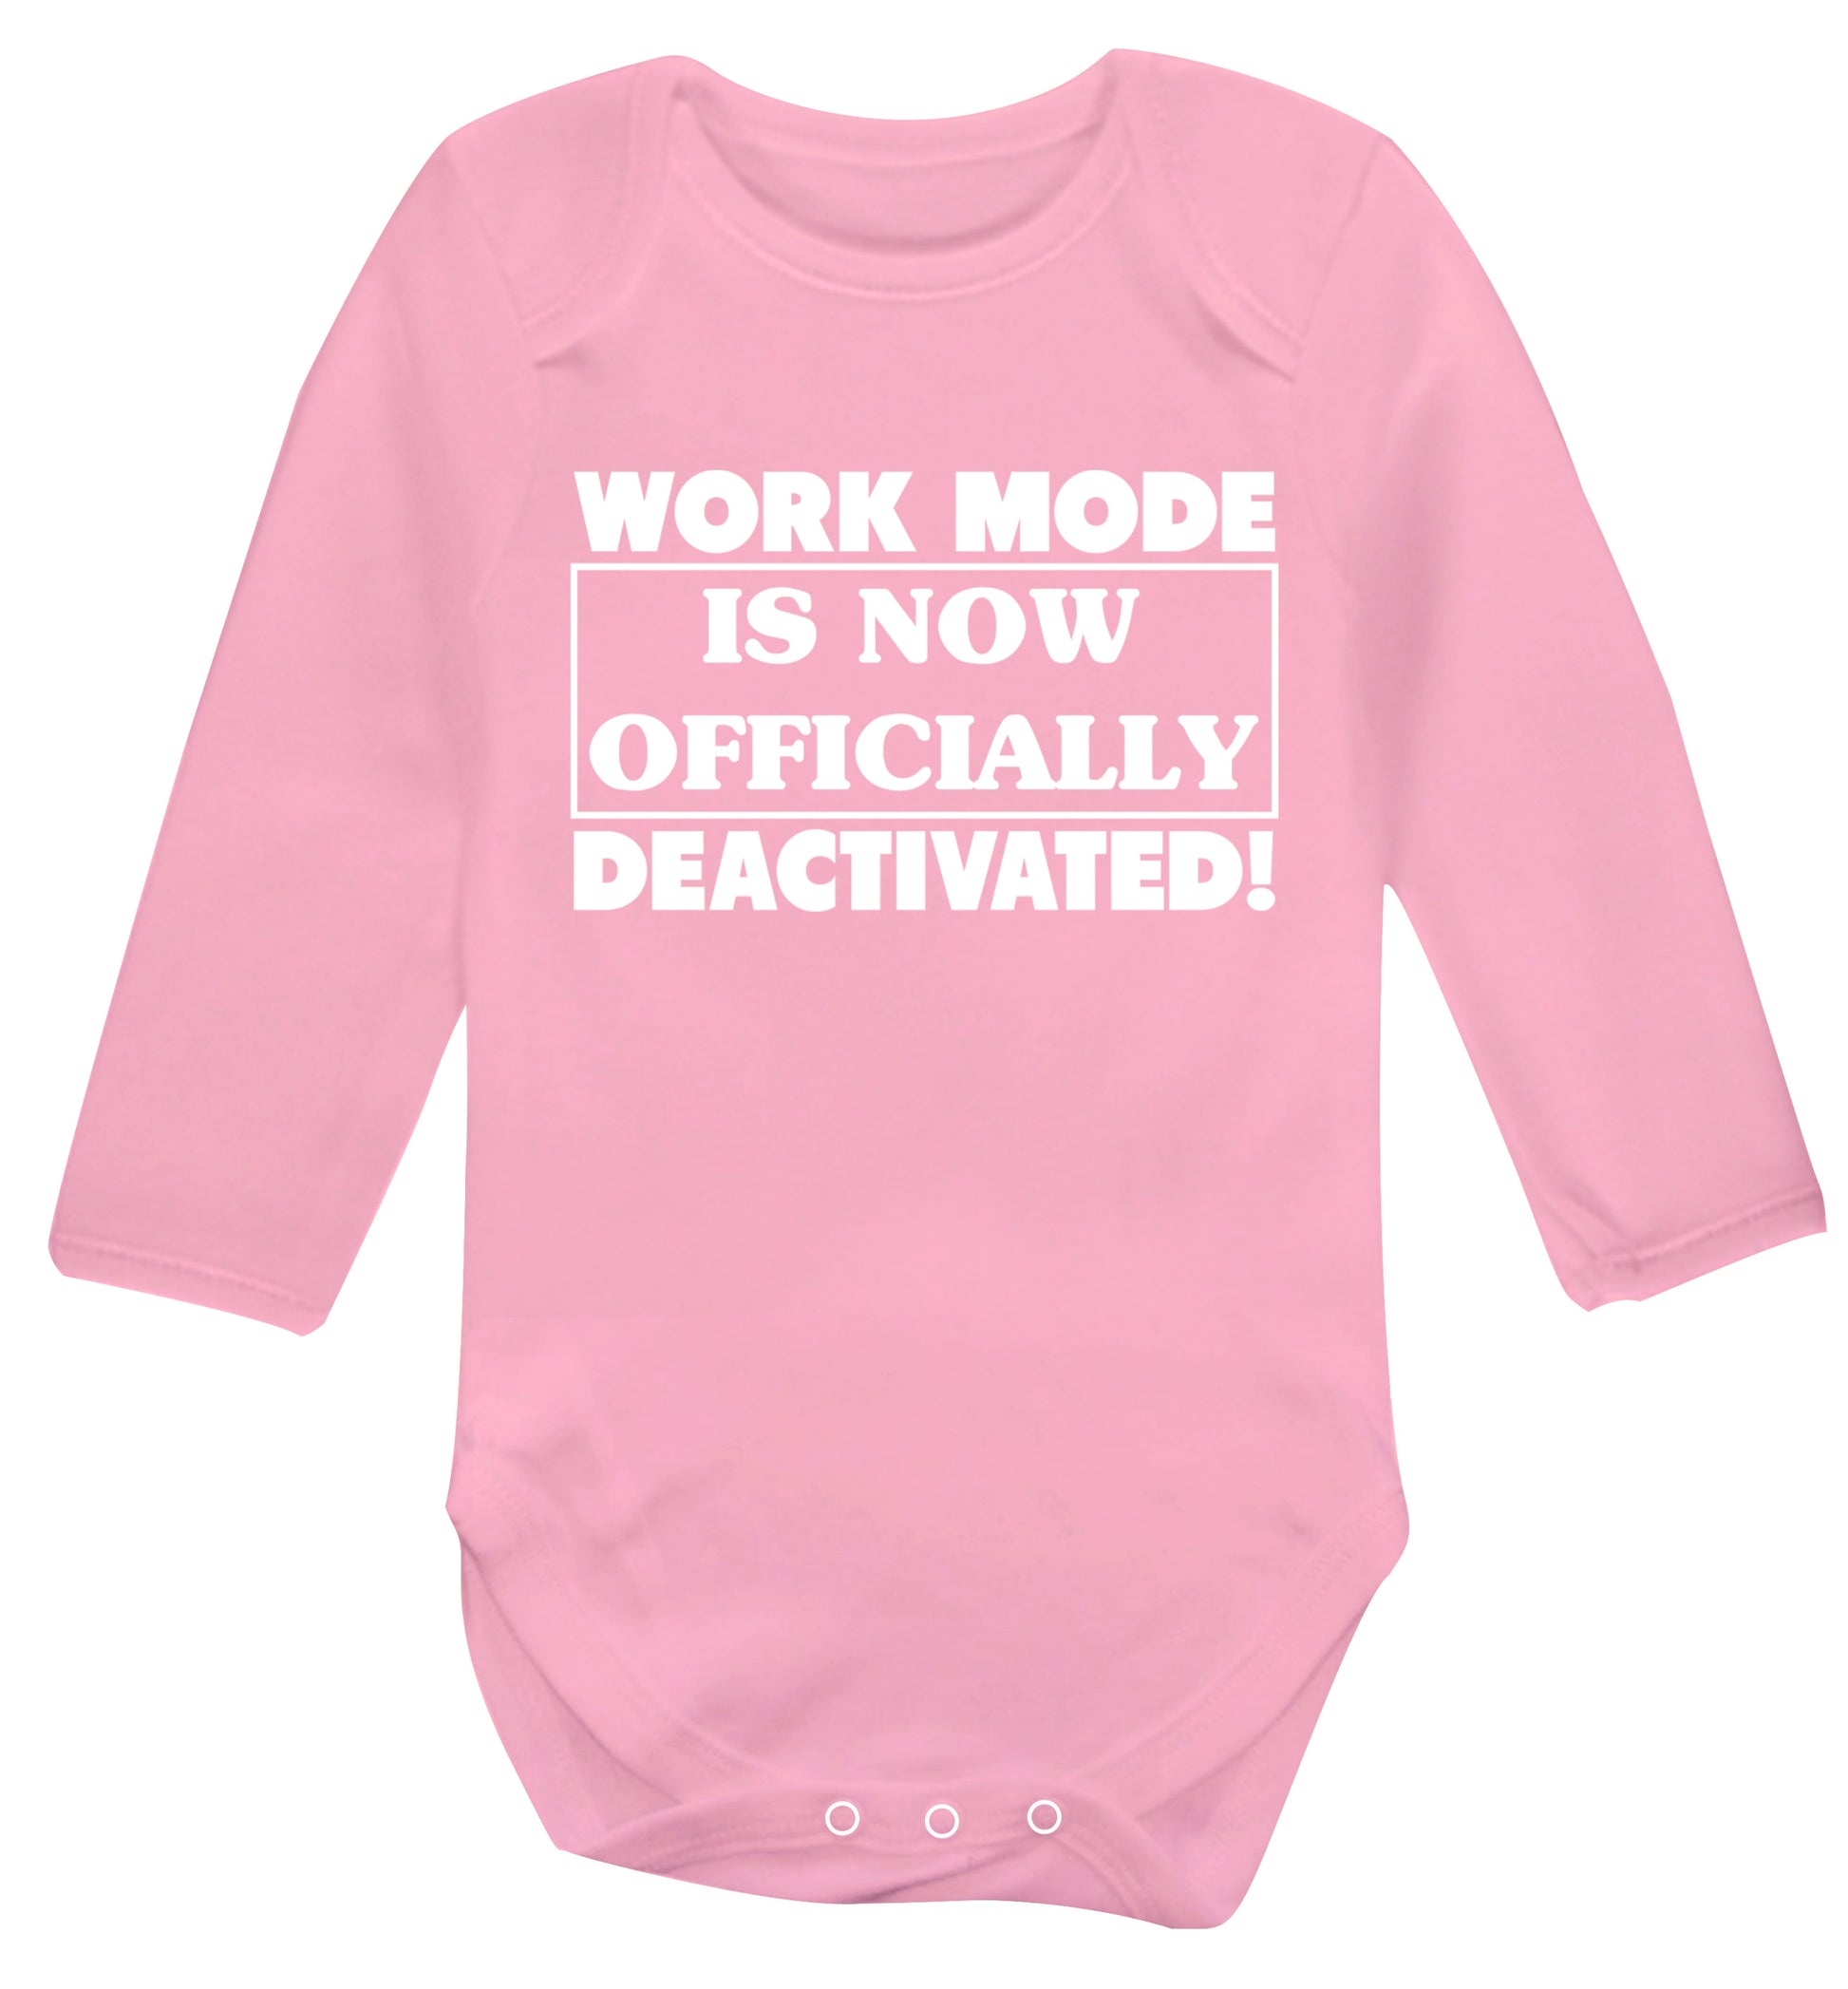 Work mode is now officially deactivated Baby Vest long sleeved pale pink 6-12 months